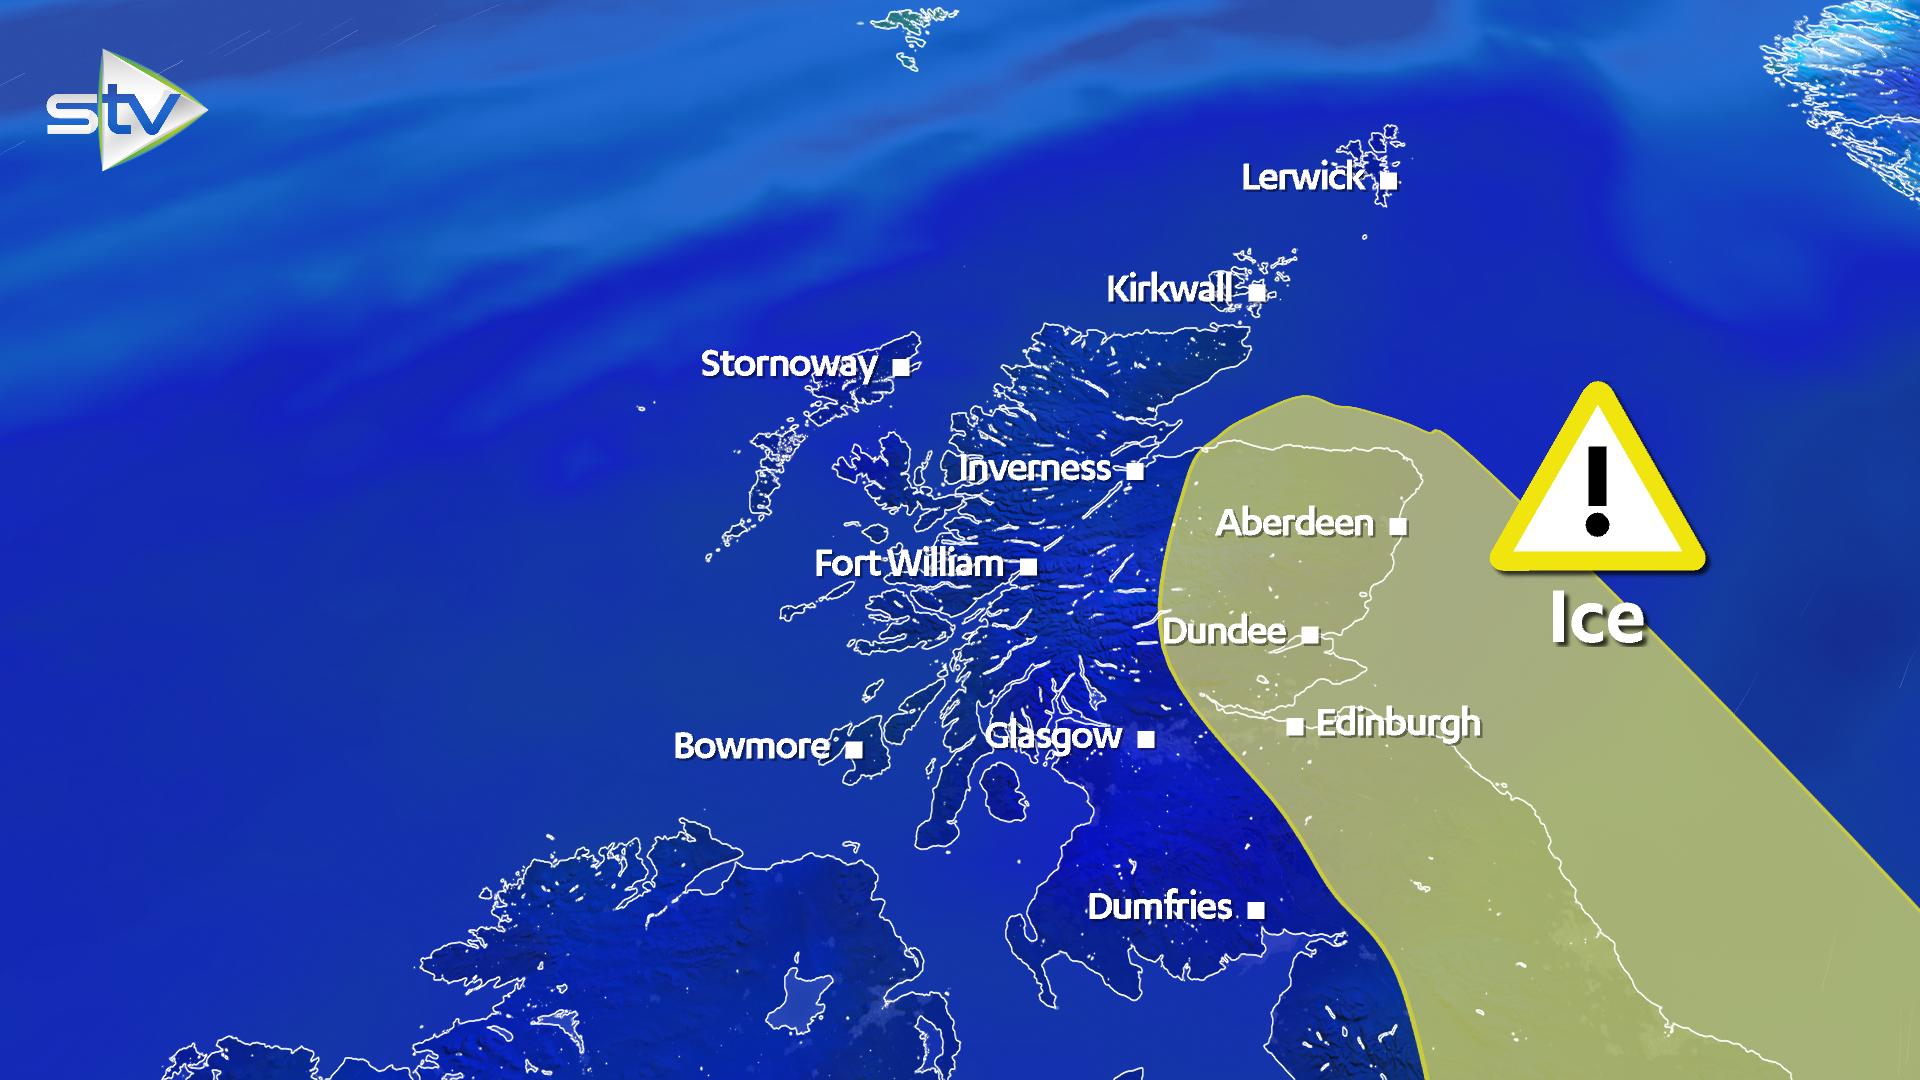 A yellow weather warning for ice has been issued for Monday and Tuesday.